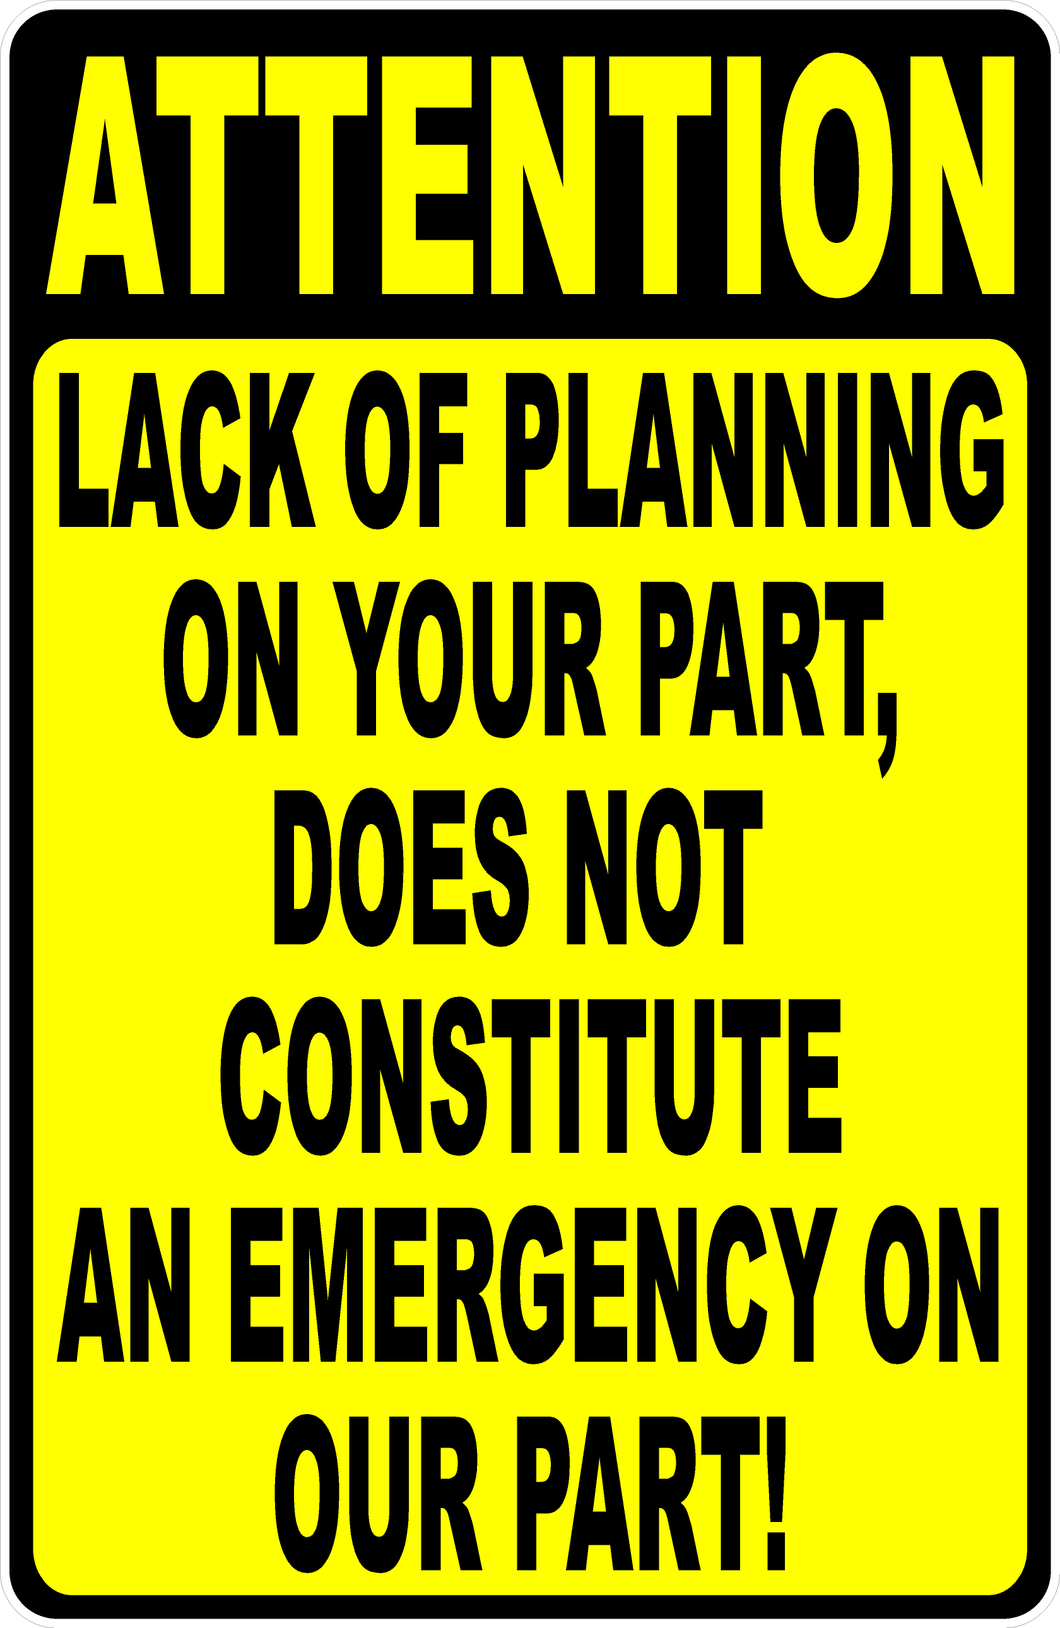 Attention Lack Of Planning On Your Part, Does Not Constitute An Emergency On Our Part! Sign